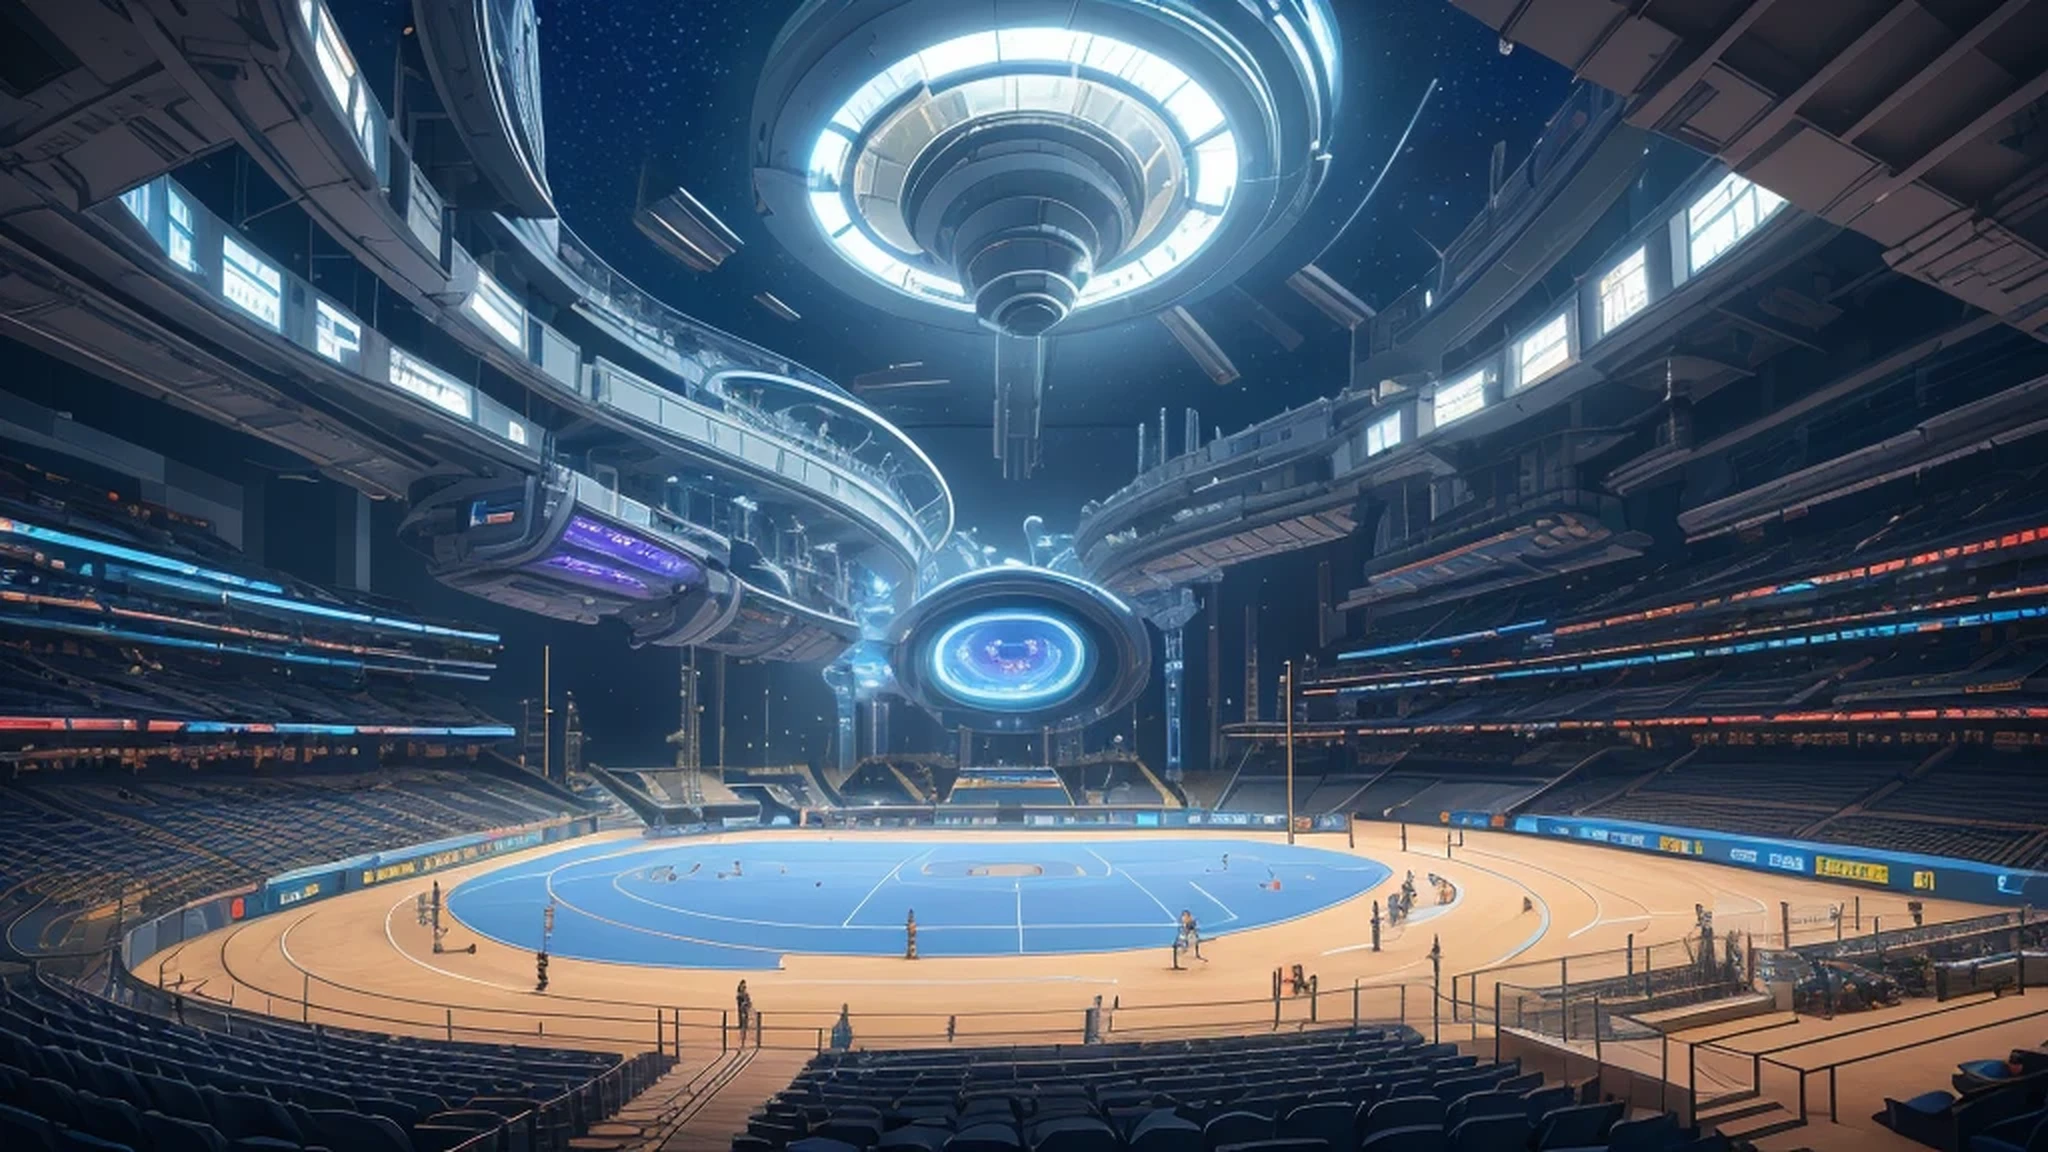 Night future scene，A five-pointed star-shaped technological dream stadium in a future science fiction city，in the starry sky，Athletes running on the playground，Grandstand seats blue，Technology streamlined layout，many viewers。track，Glass material，Forward glowing lines，Technology Playground，Sky Dome Virtual Sky，Sci-fi effect，Blue seats in the auditorium，A large translucent digital triangle screen is hung above the playground，，high quality，Exquisite，Stadium structure edge，Blue glowing curved outline，The playground is huge，The scene is grand，gorgeous，Sense of future technology，Wide Angle，Sci-fi masterpiece，，Luminous，Cyberpunk technology style